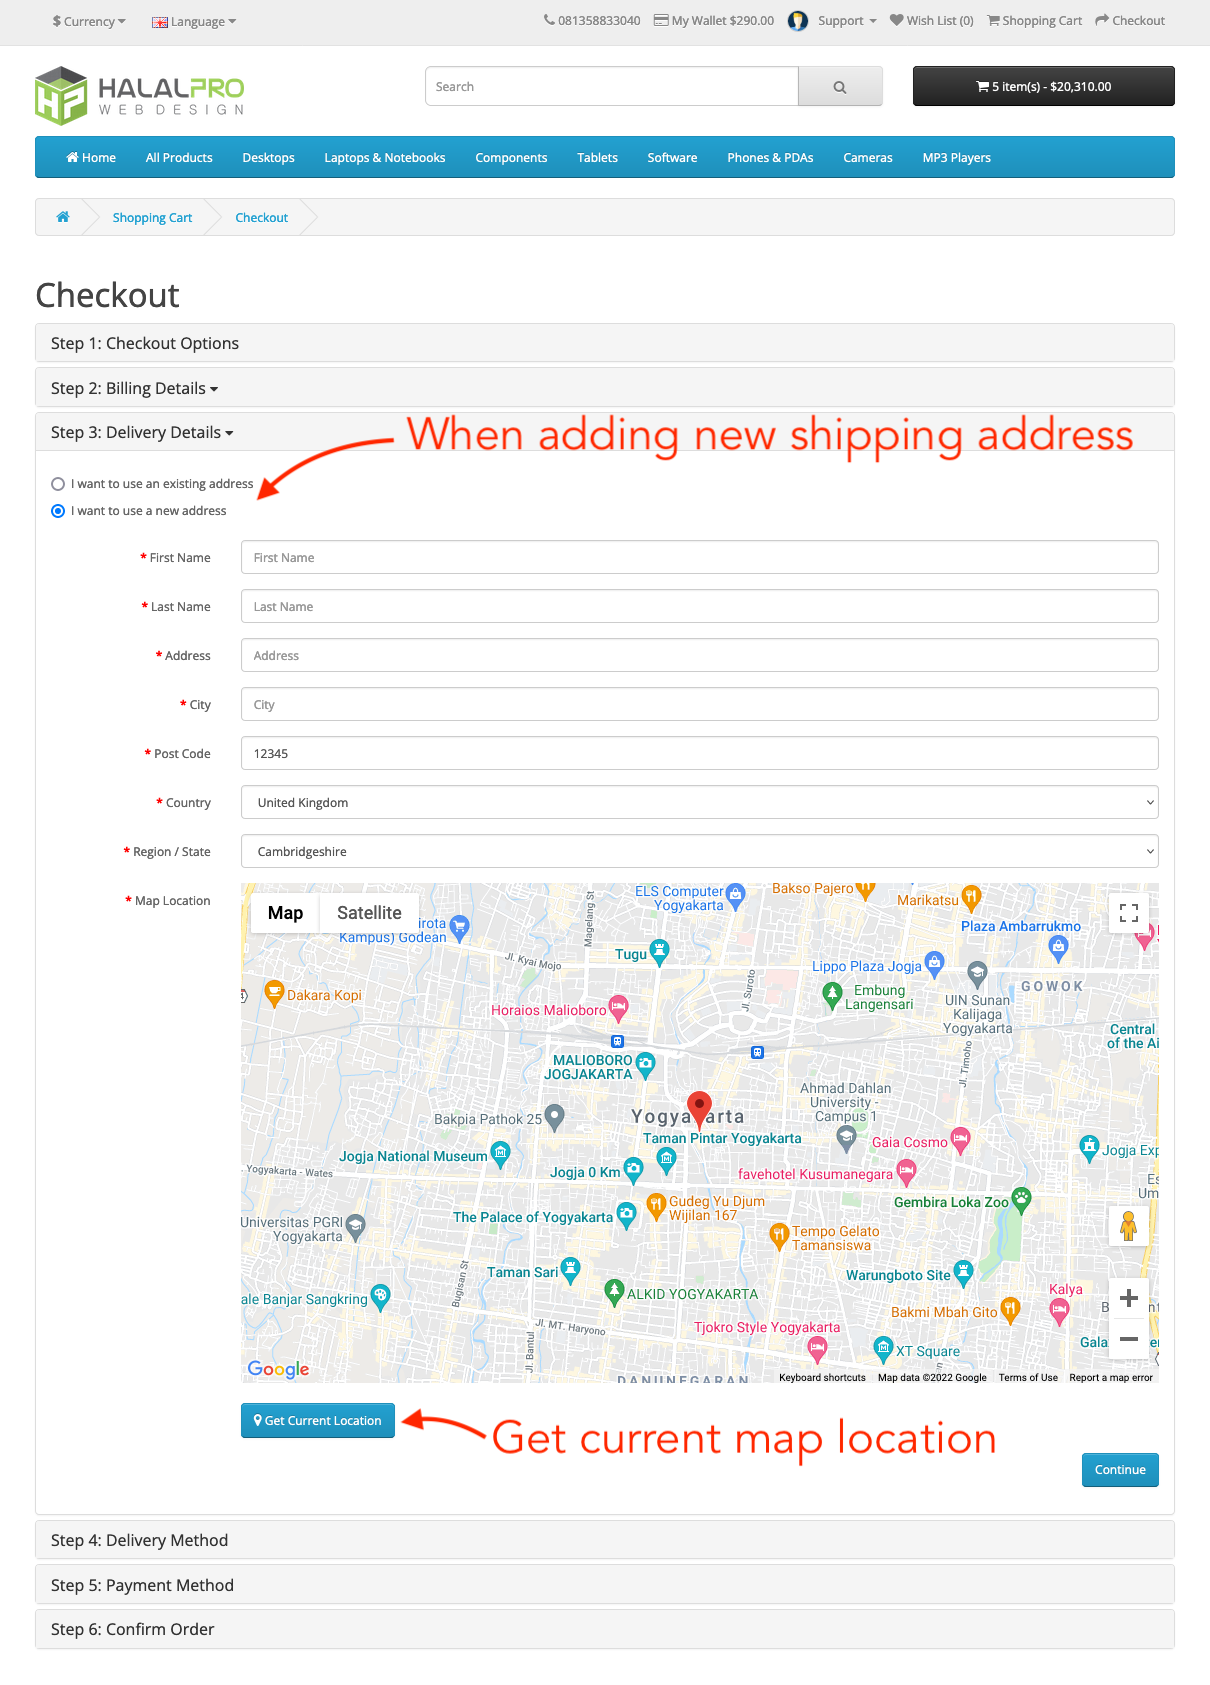 customer mark coordilate location on shipping address during checkout opencart